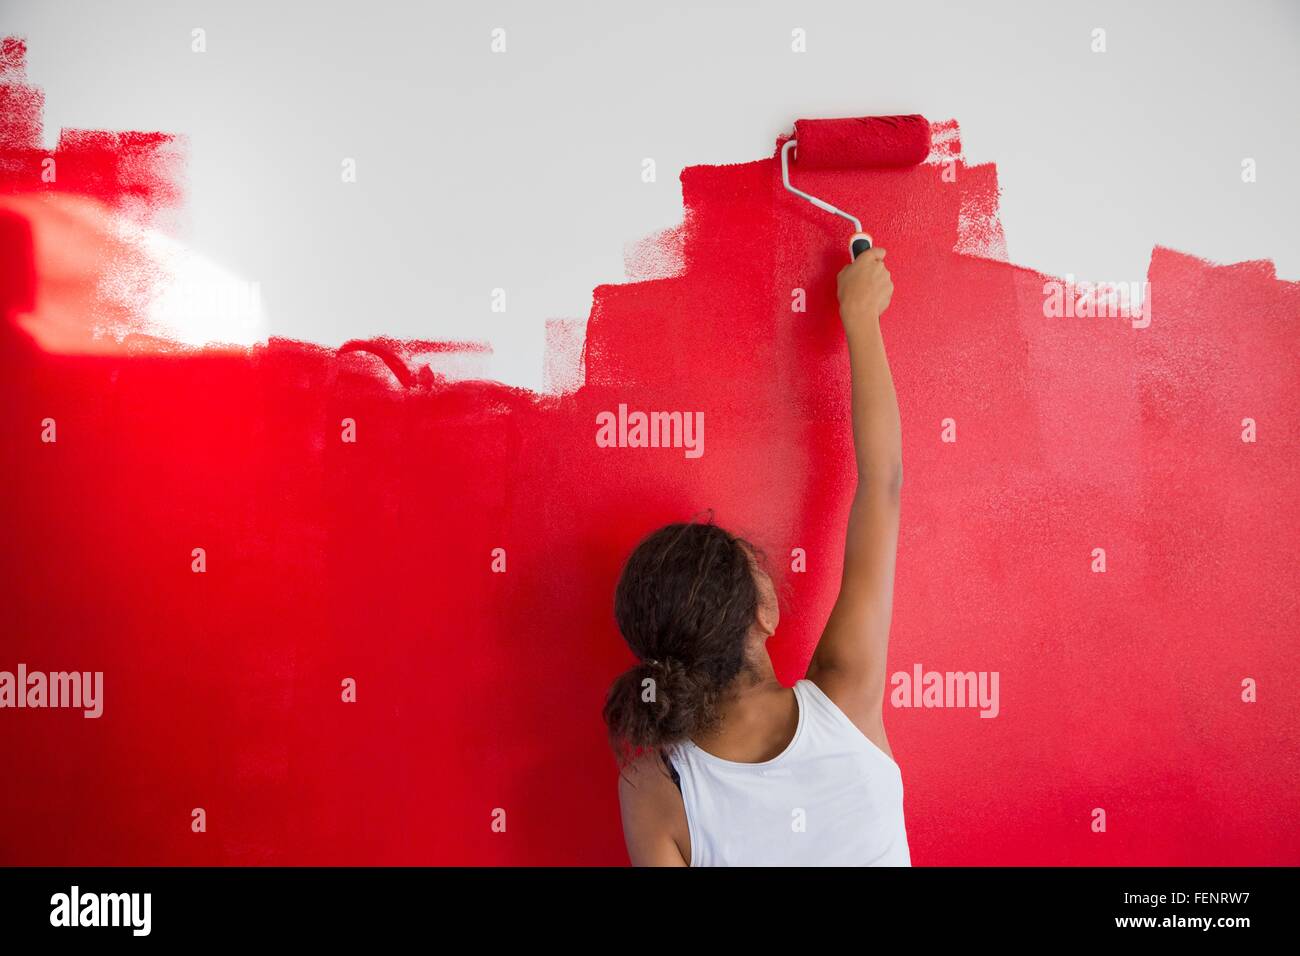 Rear View Of Girl Painting Red Wall With Paint Roller Stock Photo